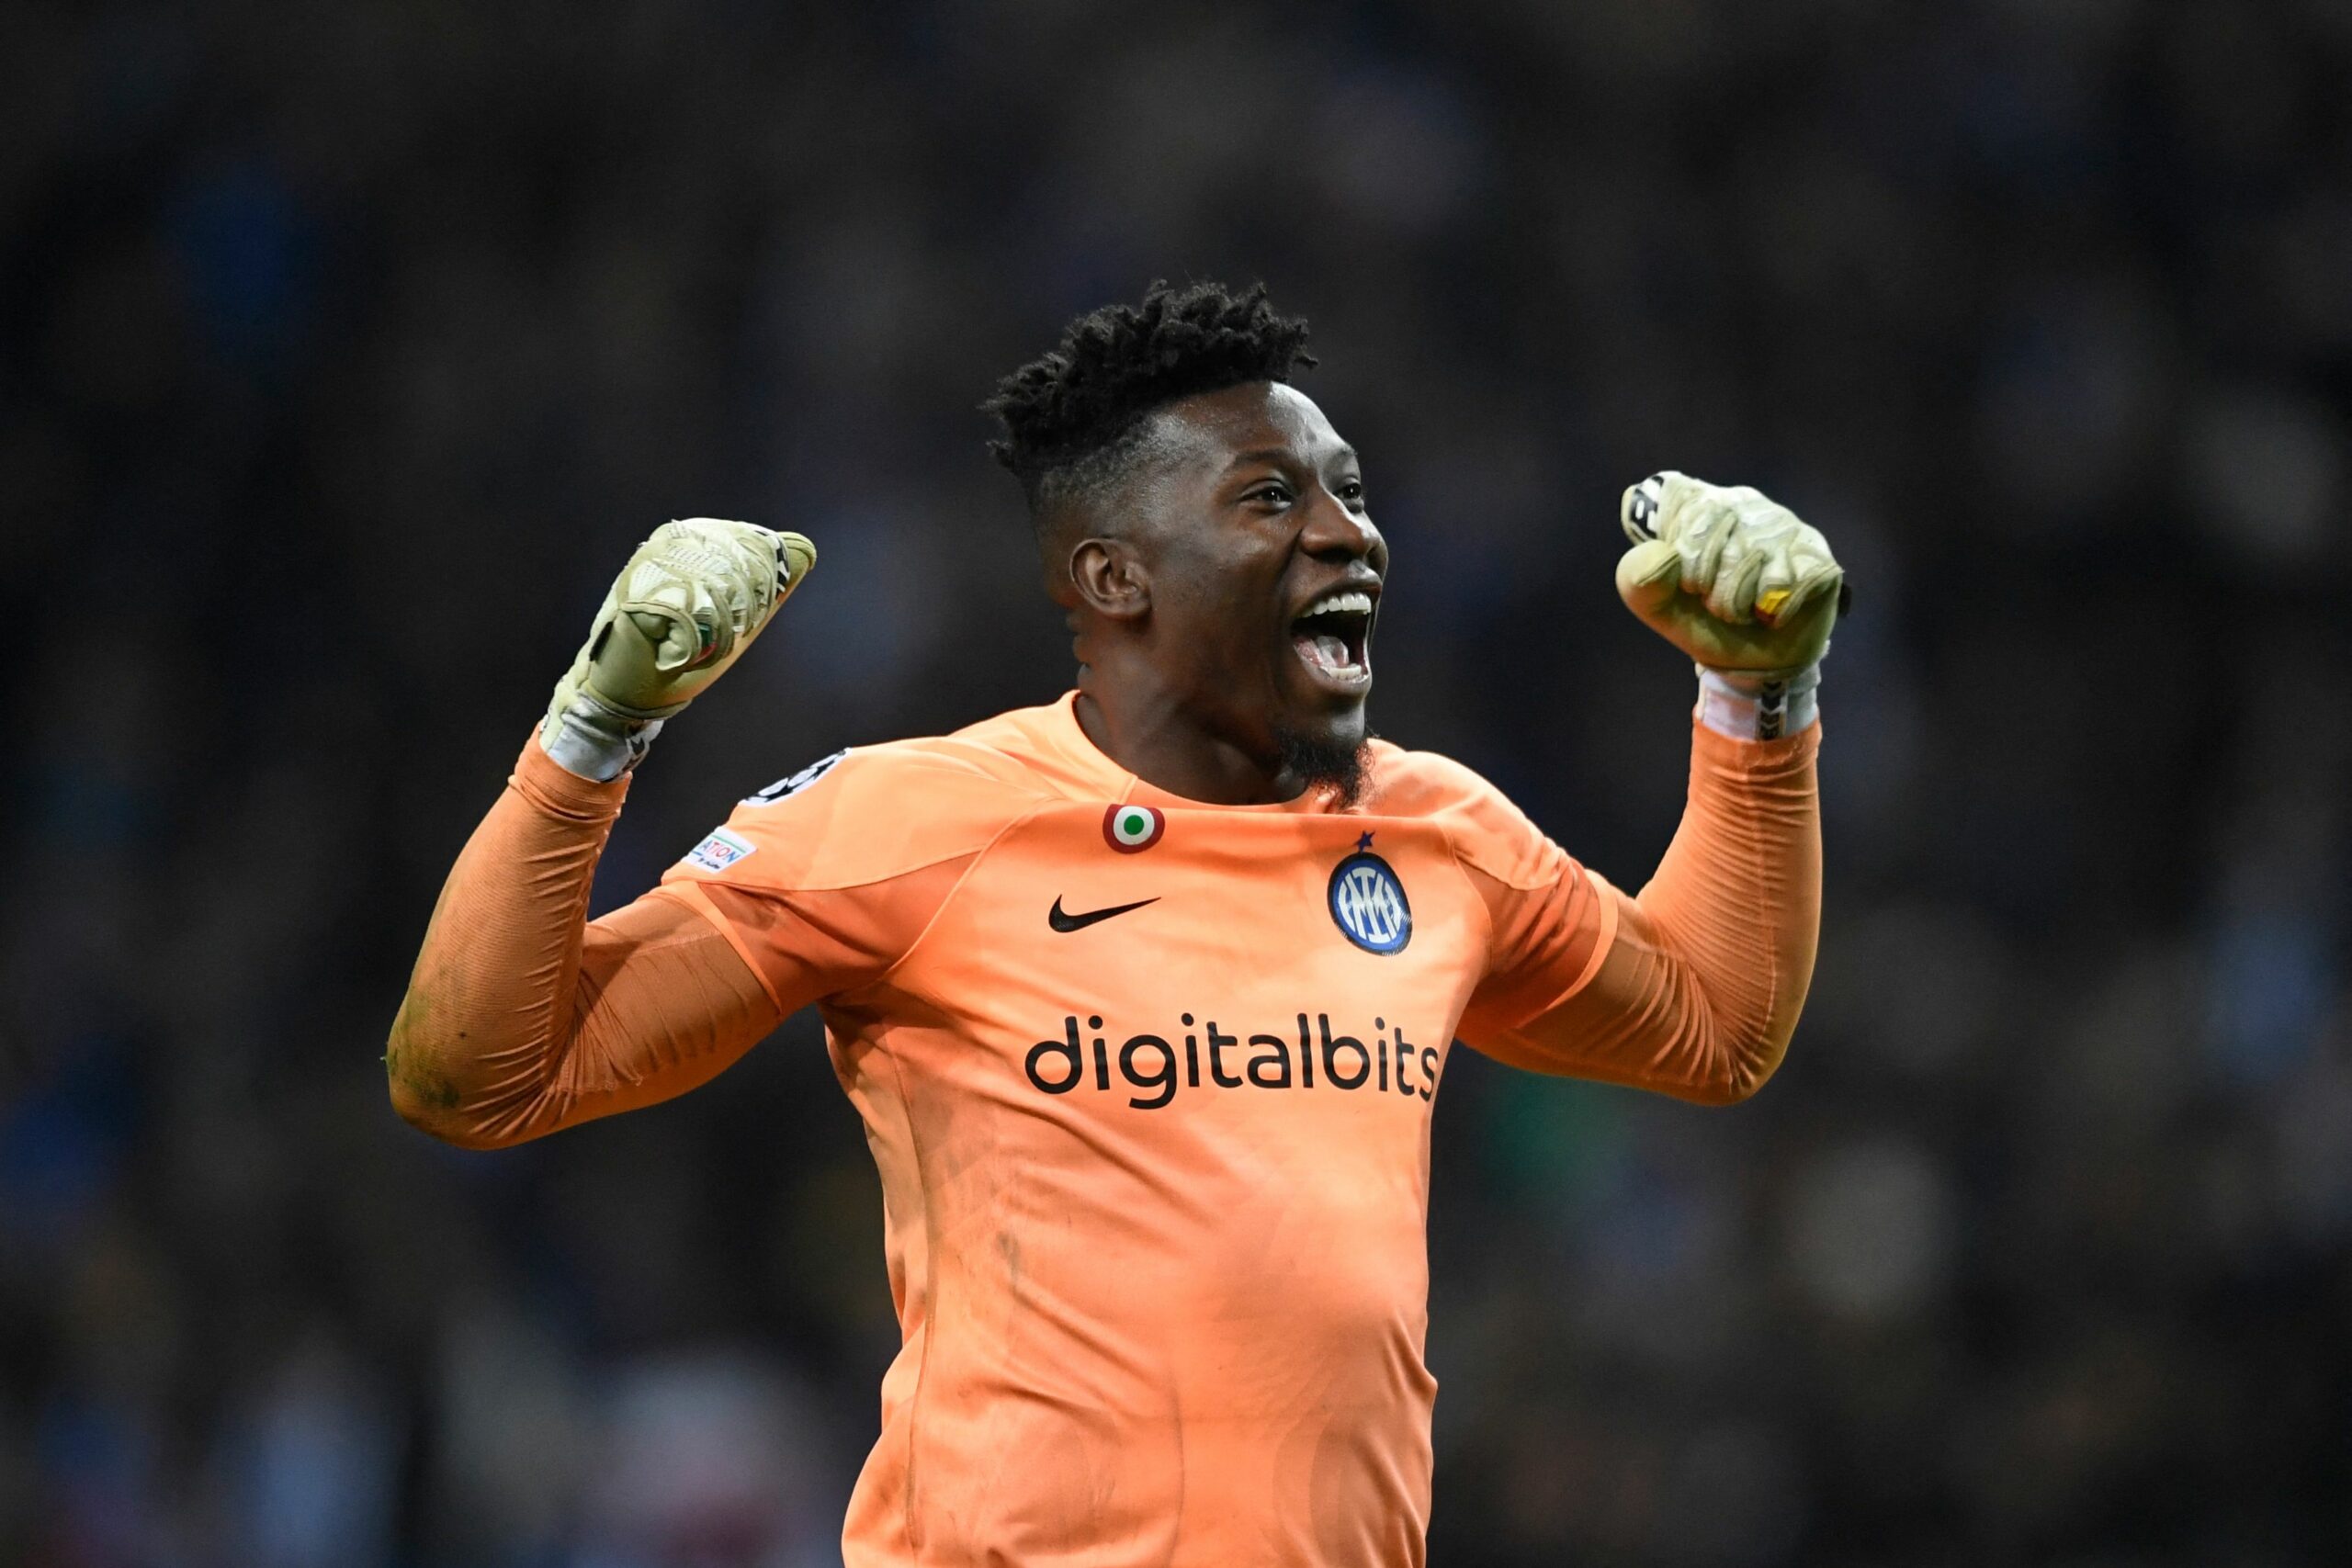 André Onana is on the verge of leaving Inter to join Manchester United. The English side raised their previous bid, bringing it to €50M plus €5M add-ons.